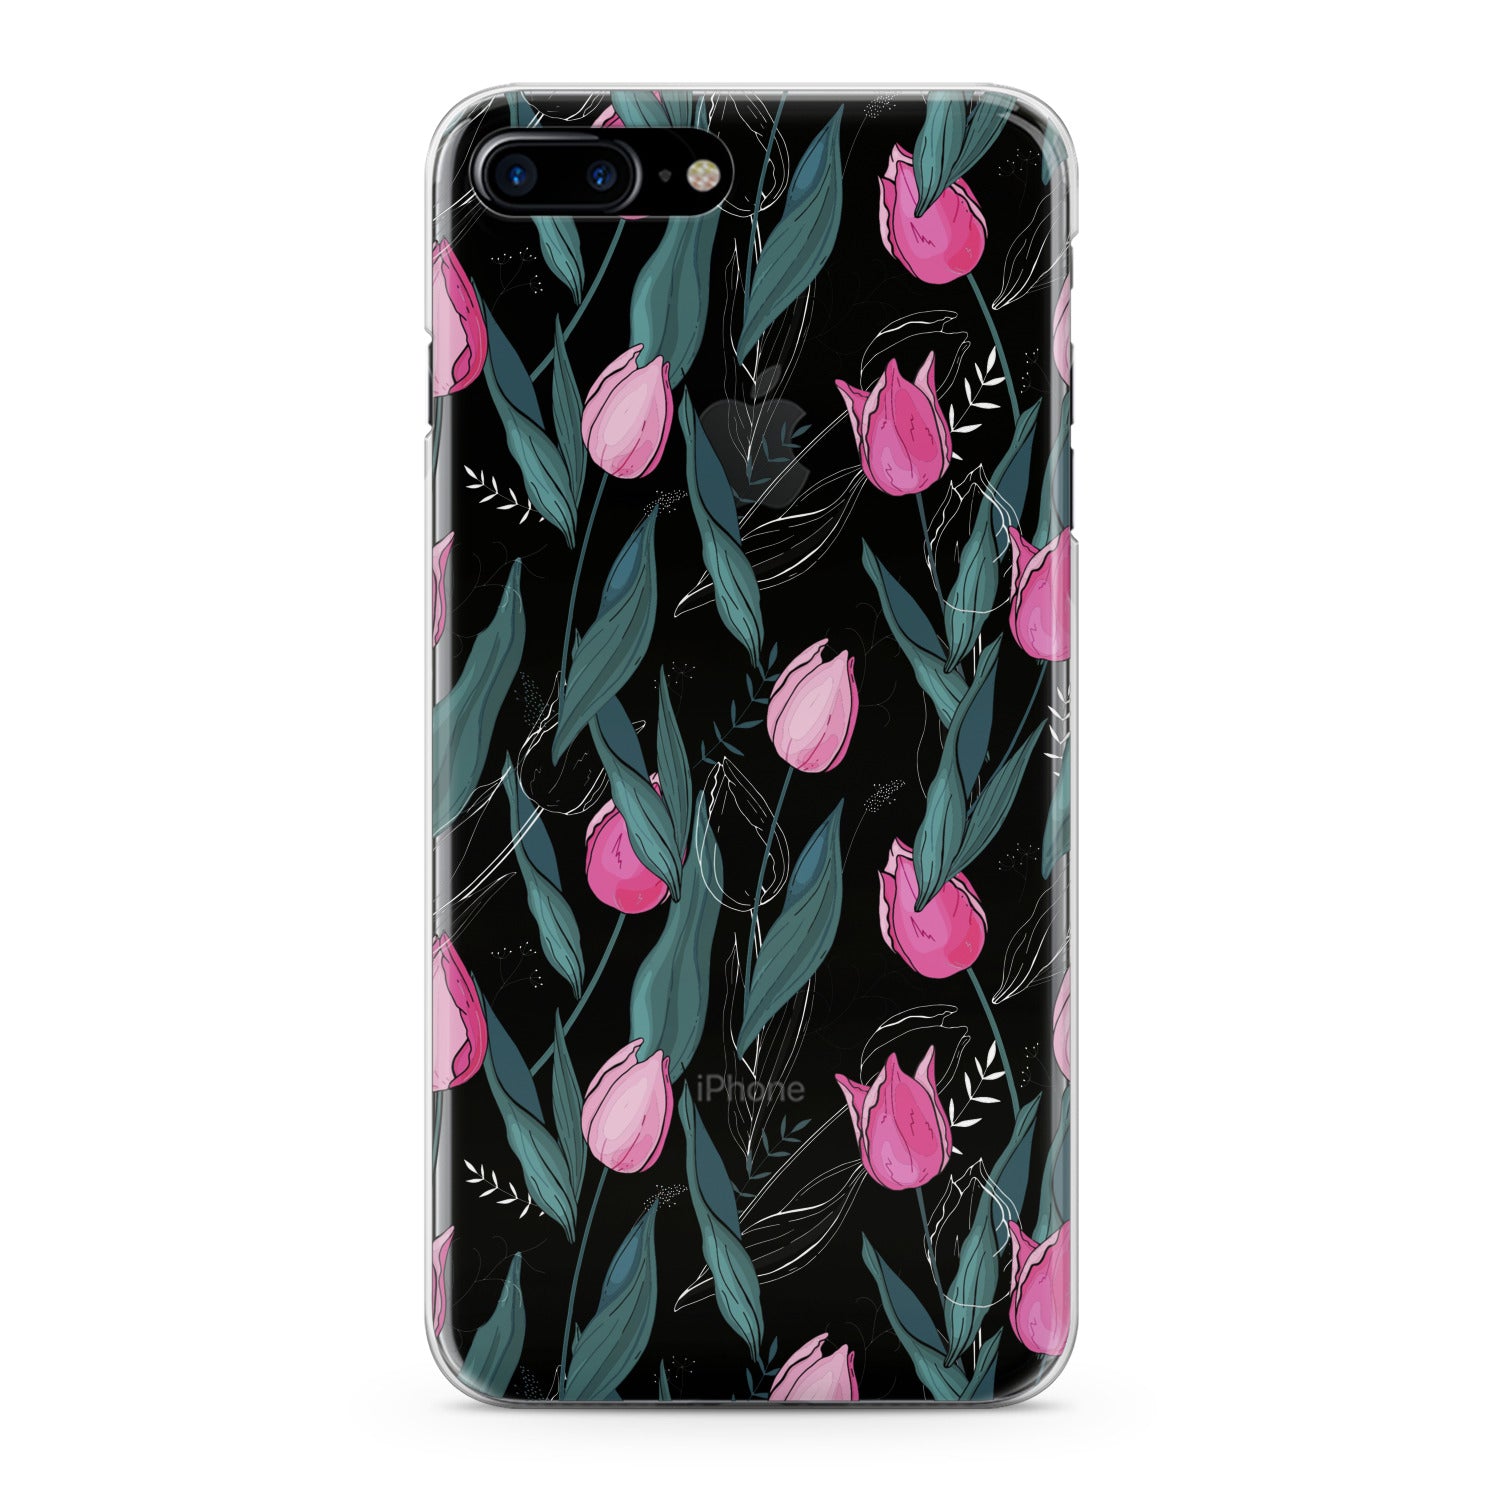 Lex Altern Gentle Pink Tulips Phone Case for your iPhone & Android phone.